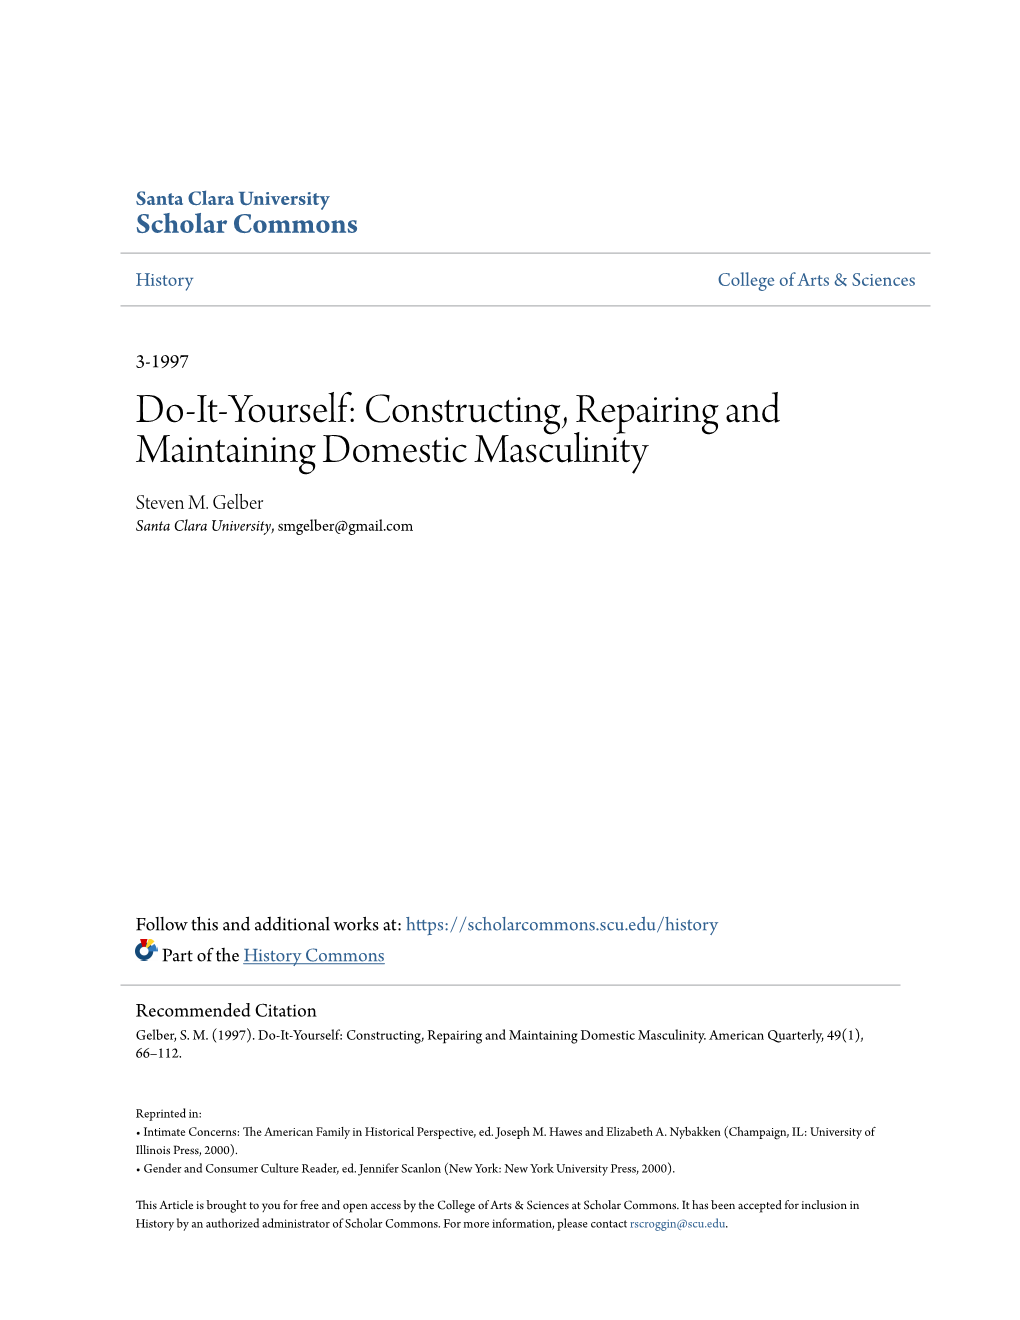 Constructing, Repairing and Maintaining Domestic Masculinity Steven M